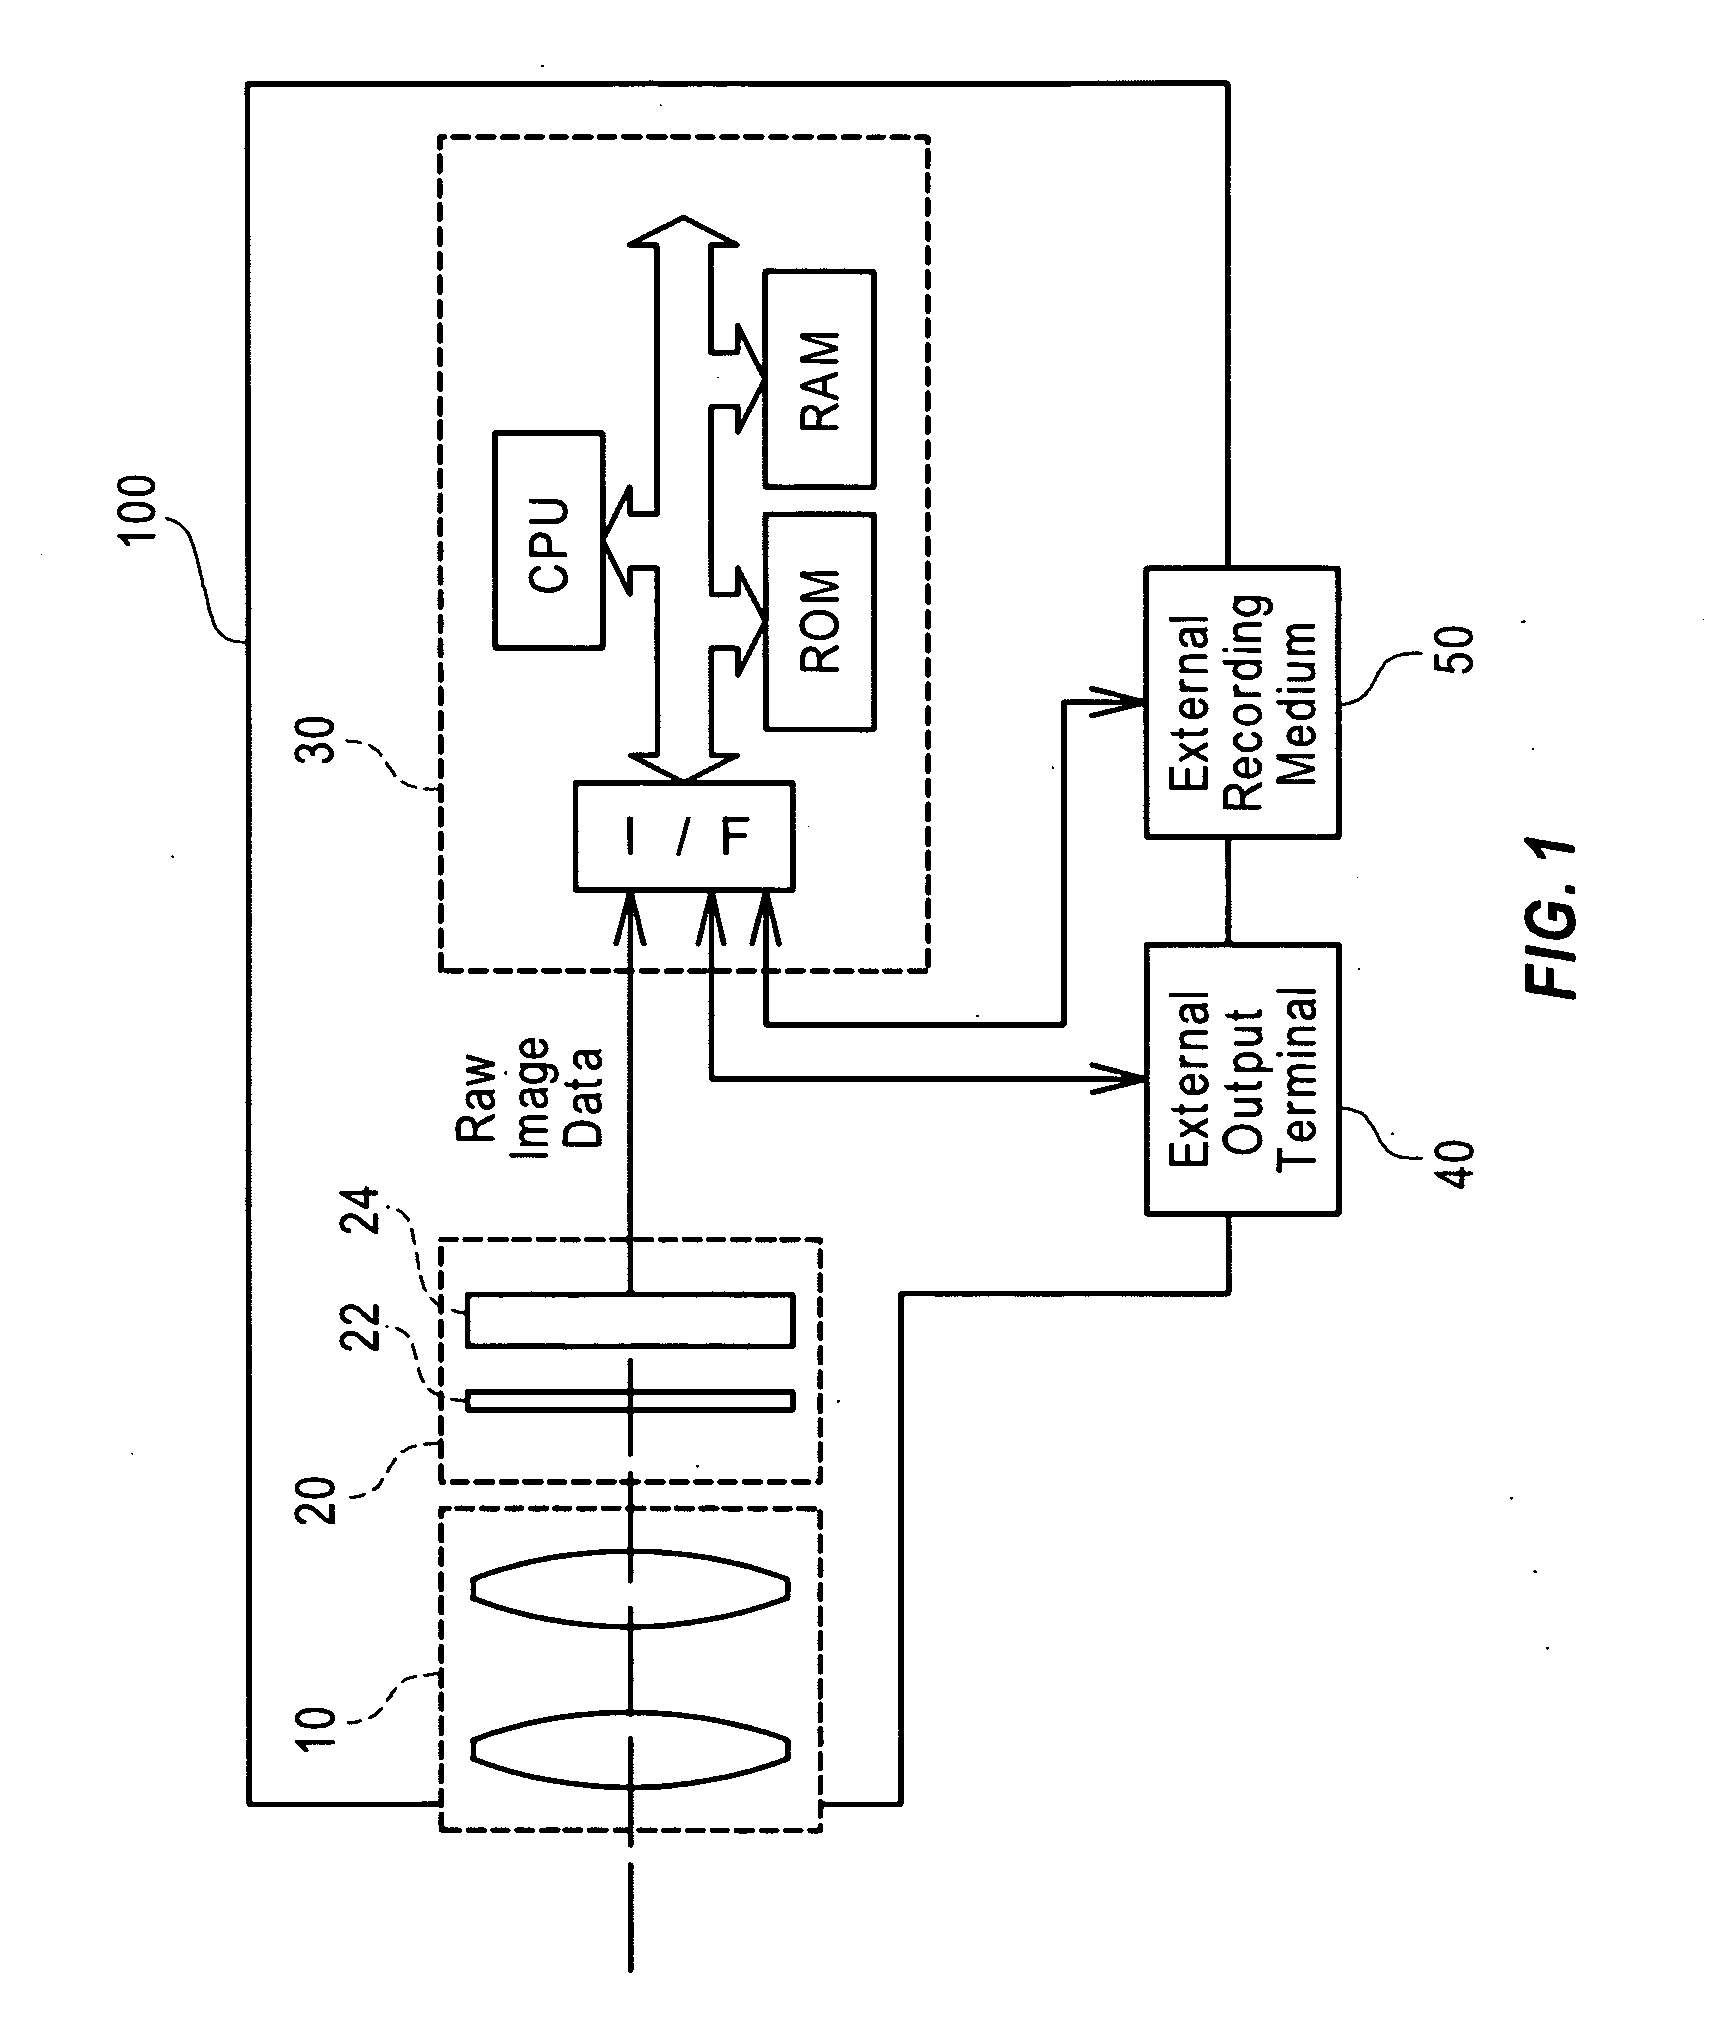 Image processing apparatus, image processing method, and program for attaining image processing